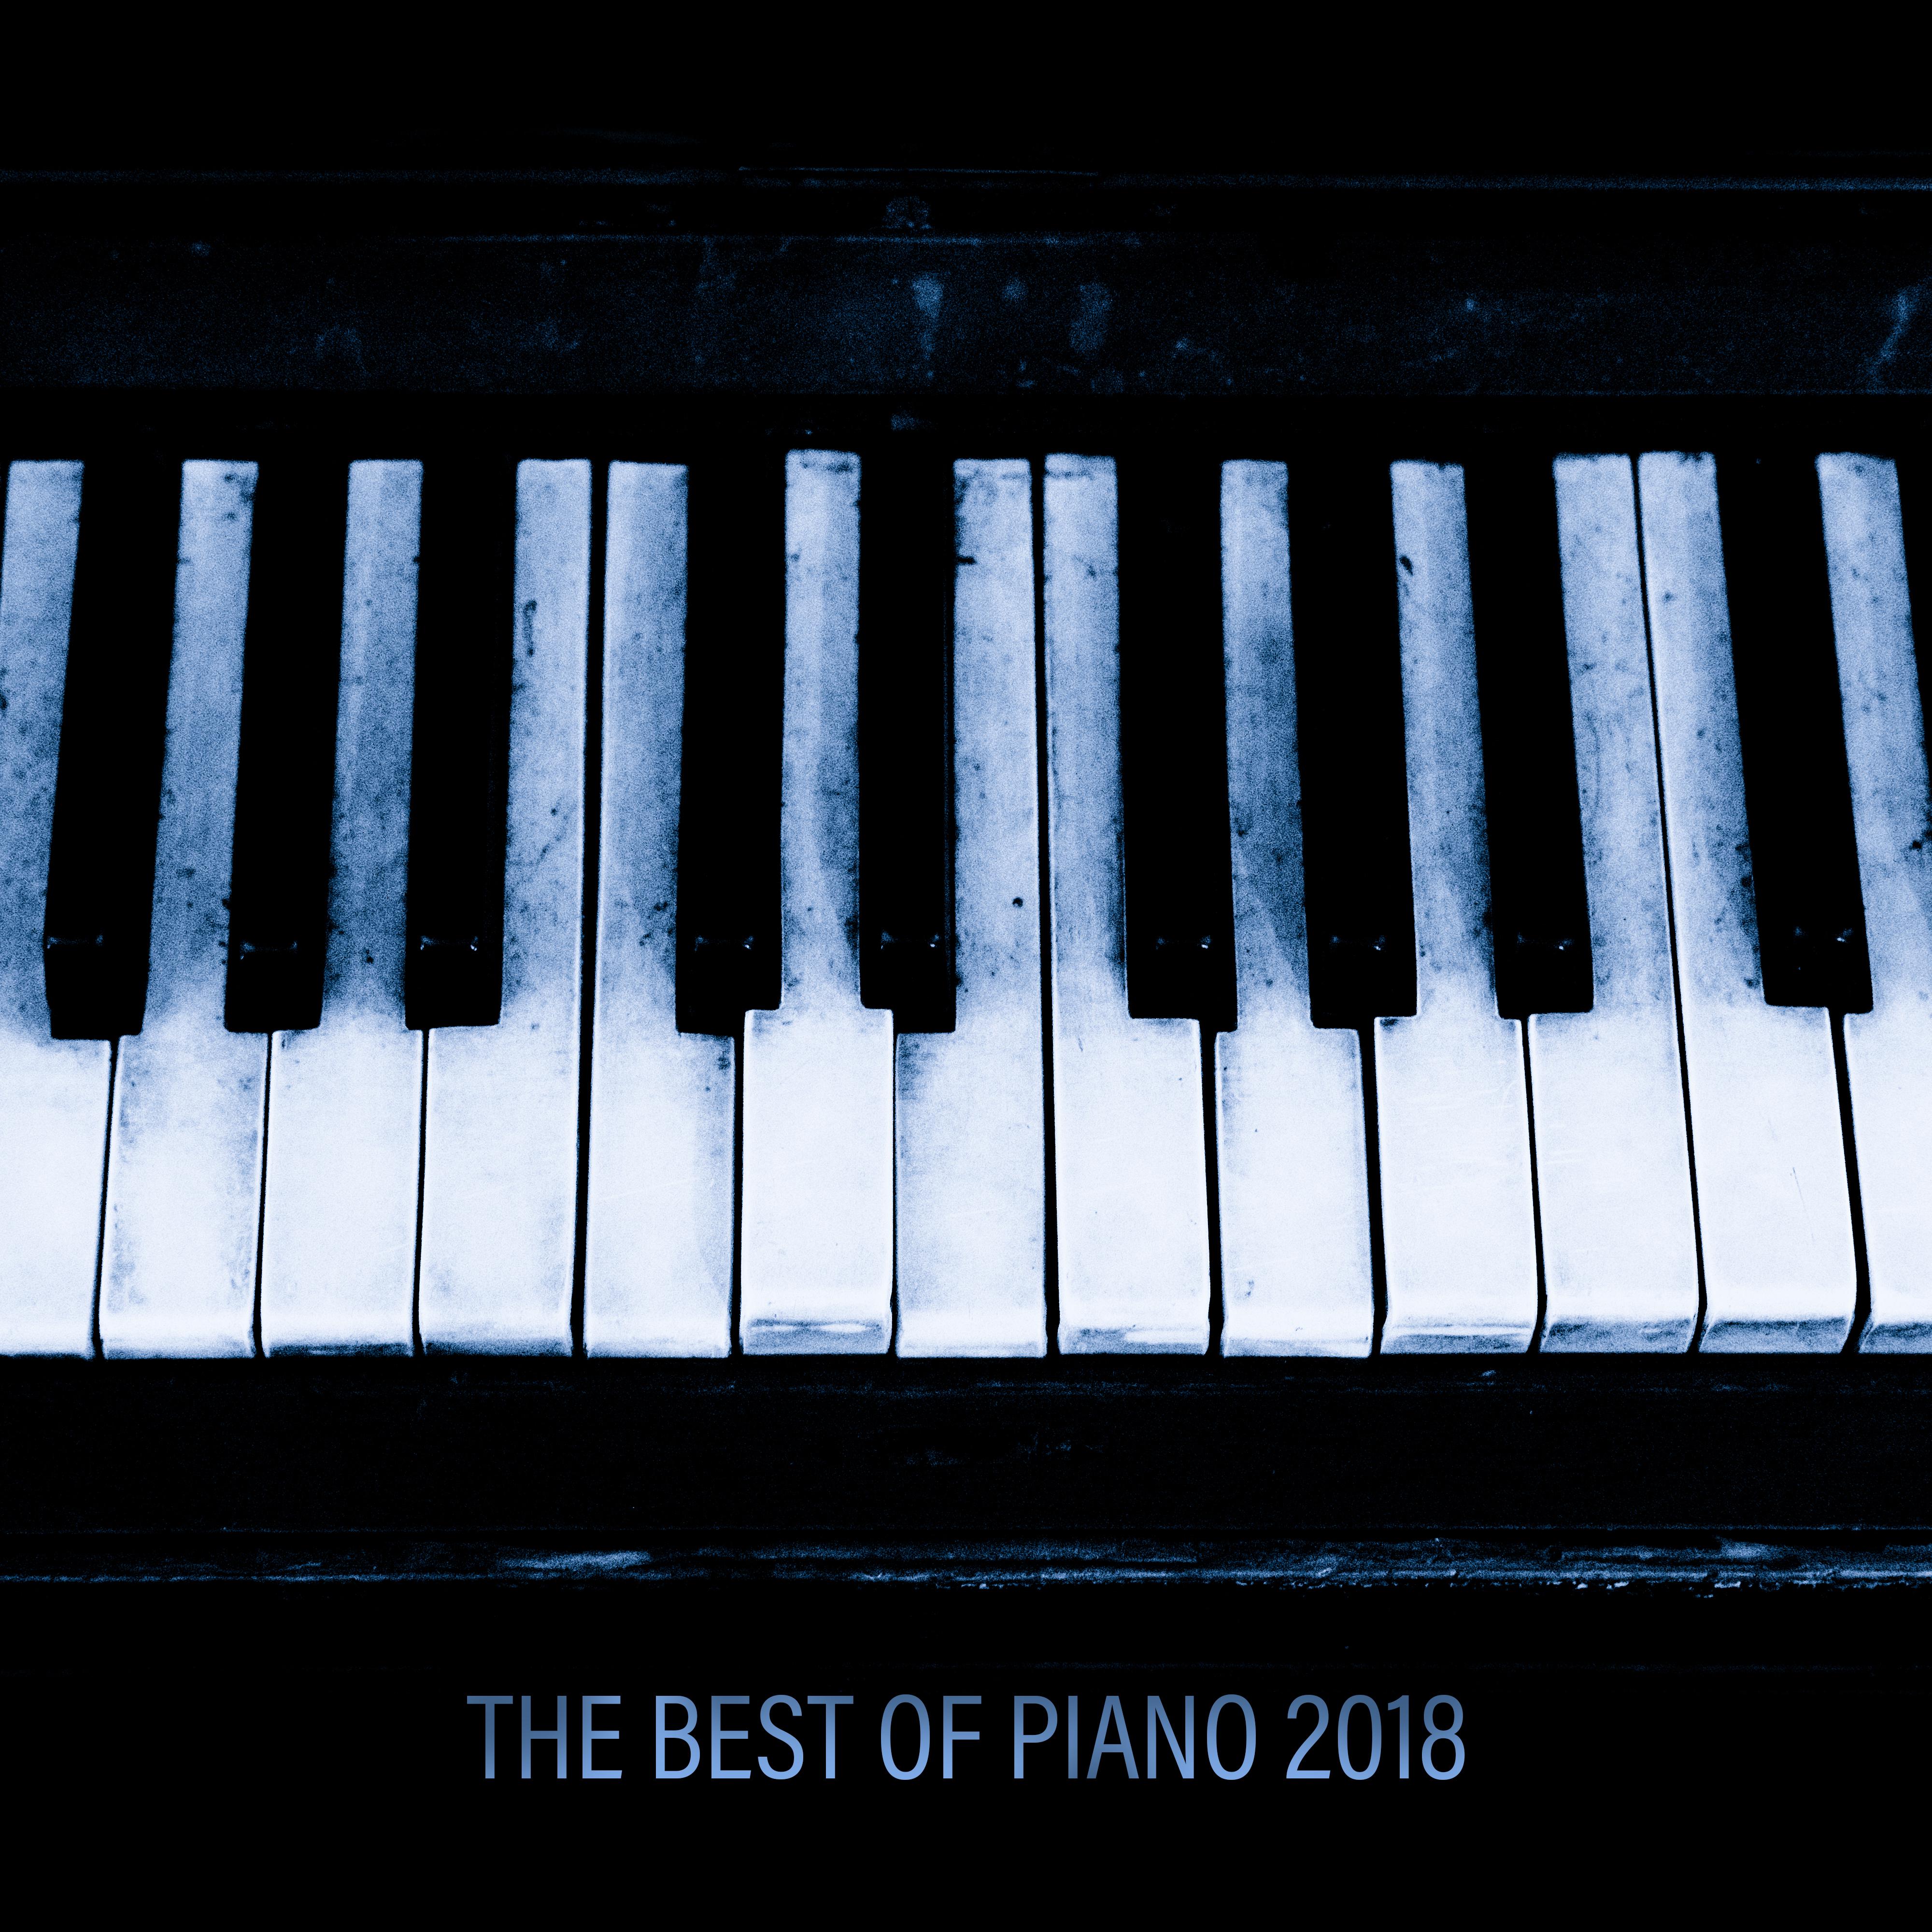 The Best of Piano 2018